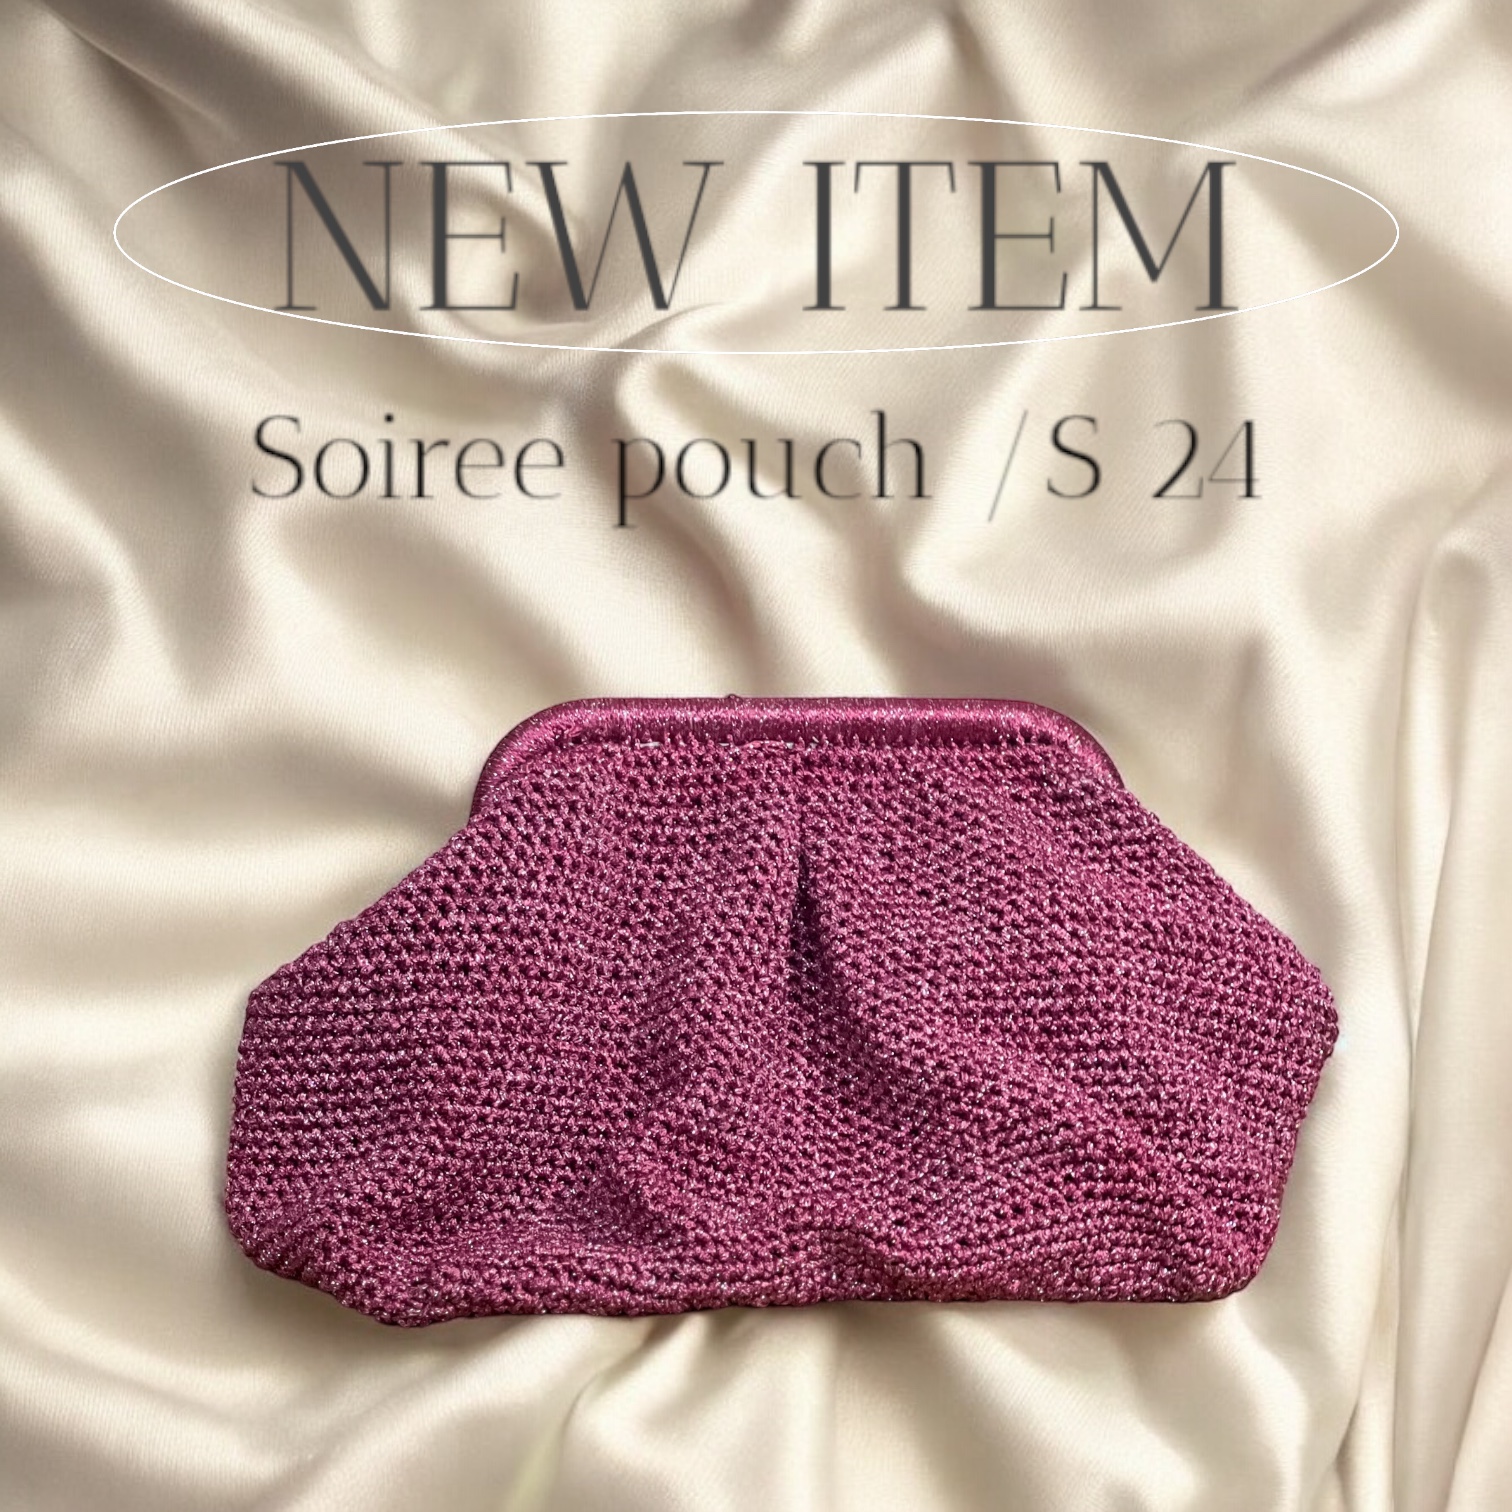 Soiree pouch hover image